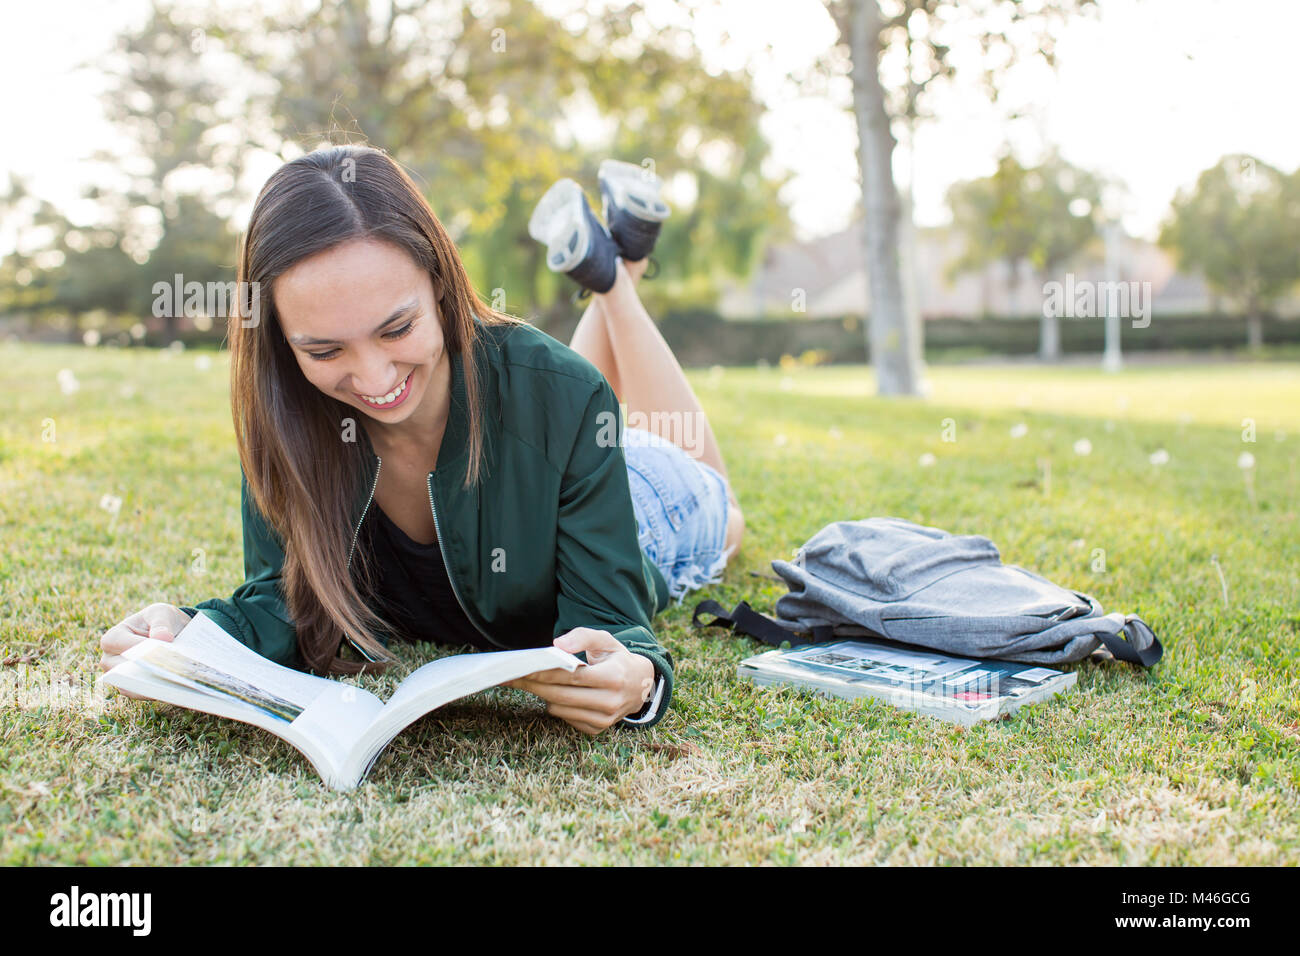 Young ethnic woman outside studying school book Stock Photo